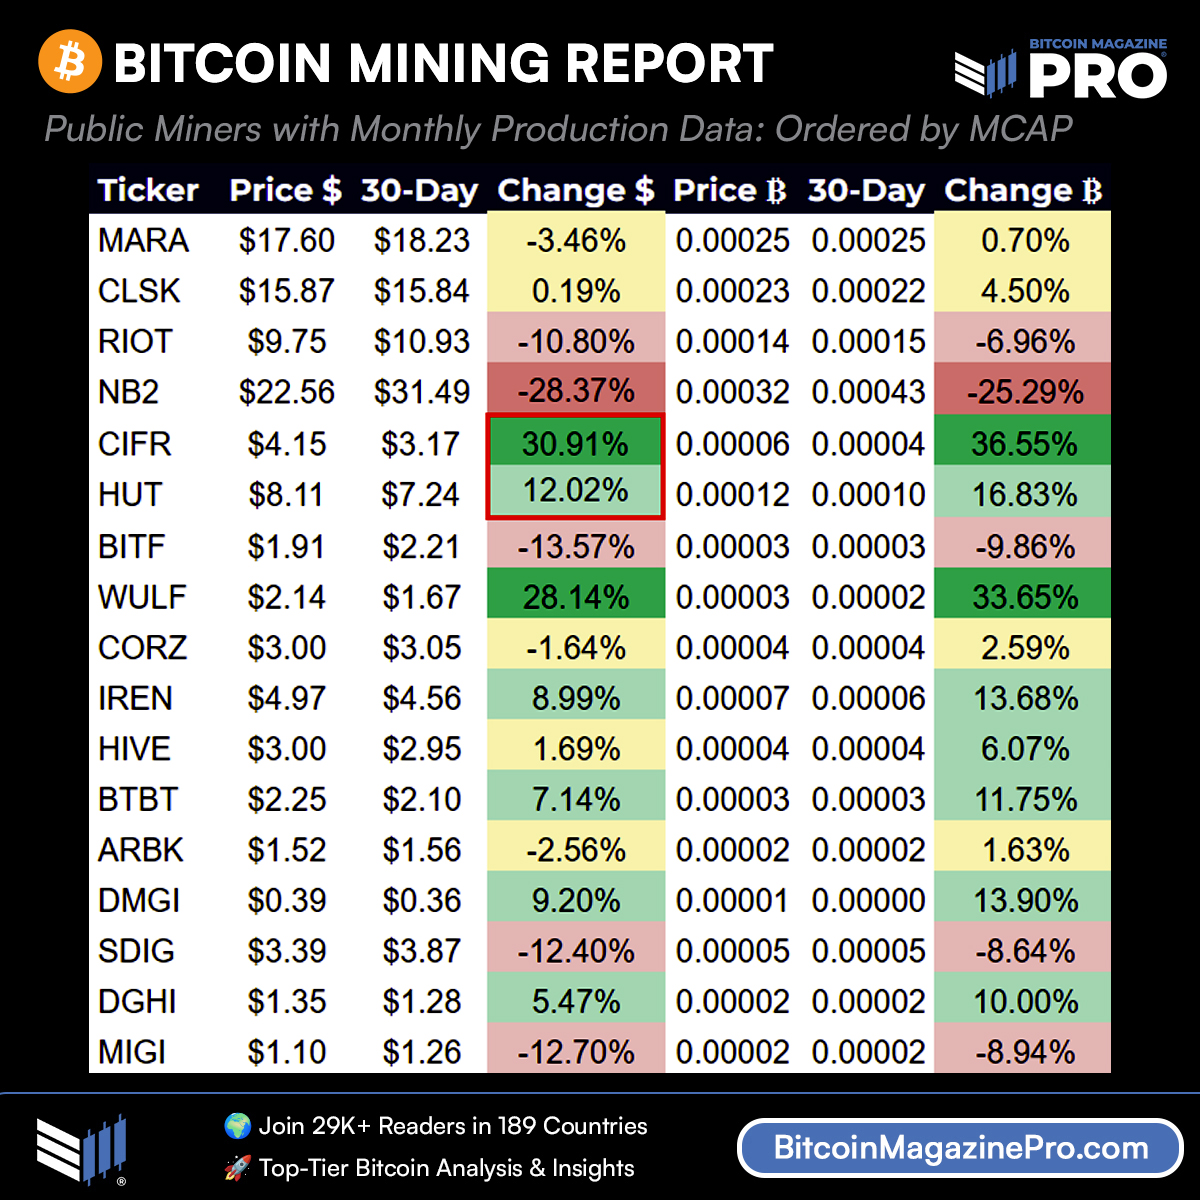 ⚡️ #Bitcoin Mining Pre-Halving Report ⛏️🧑‍💻 An in-depth analysis of the current state of Bitcoin mining, network activity, and market forces as the halving event draws near, revealing strategic insights for investors. ➡️ Read report: bmpro.substack.com/p/bitcoin-mini… 👀